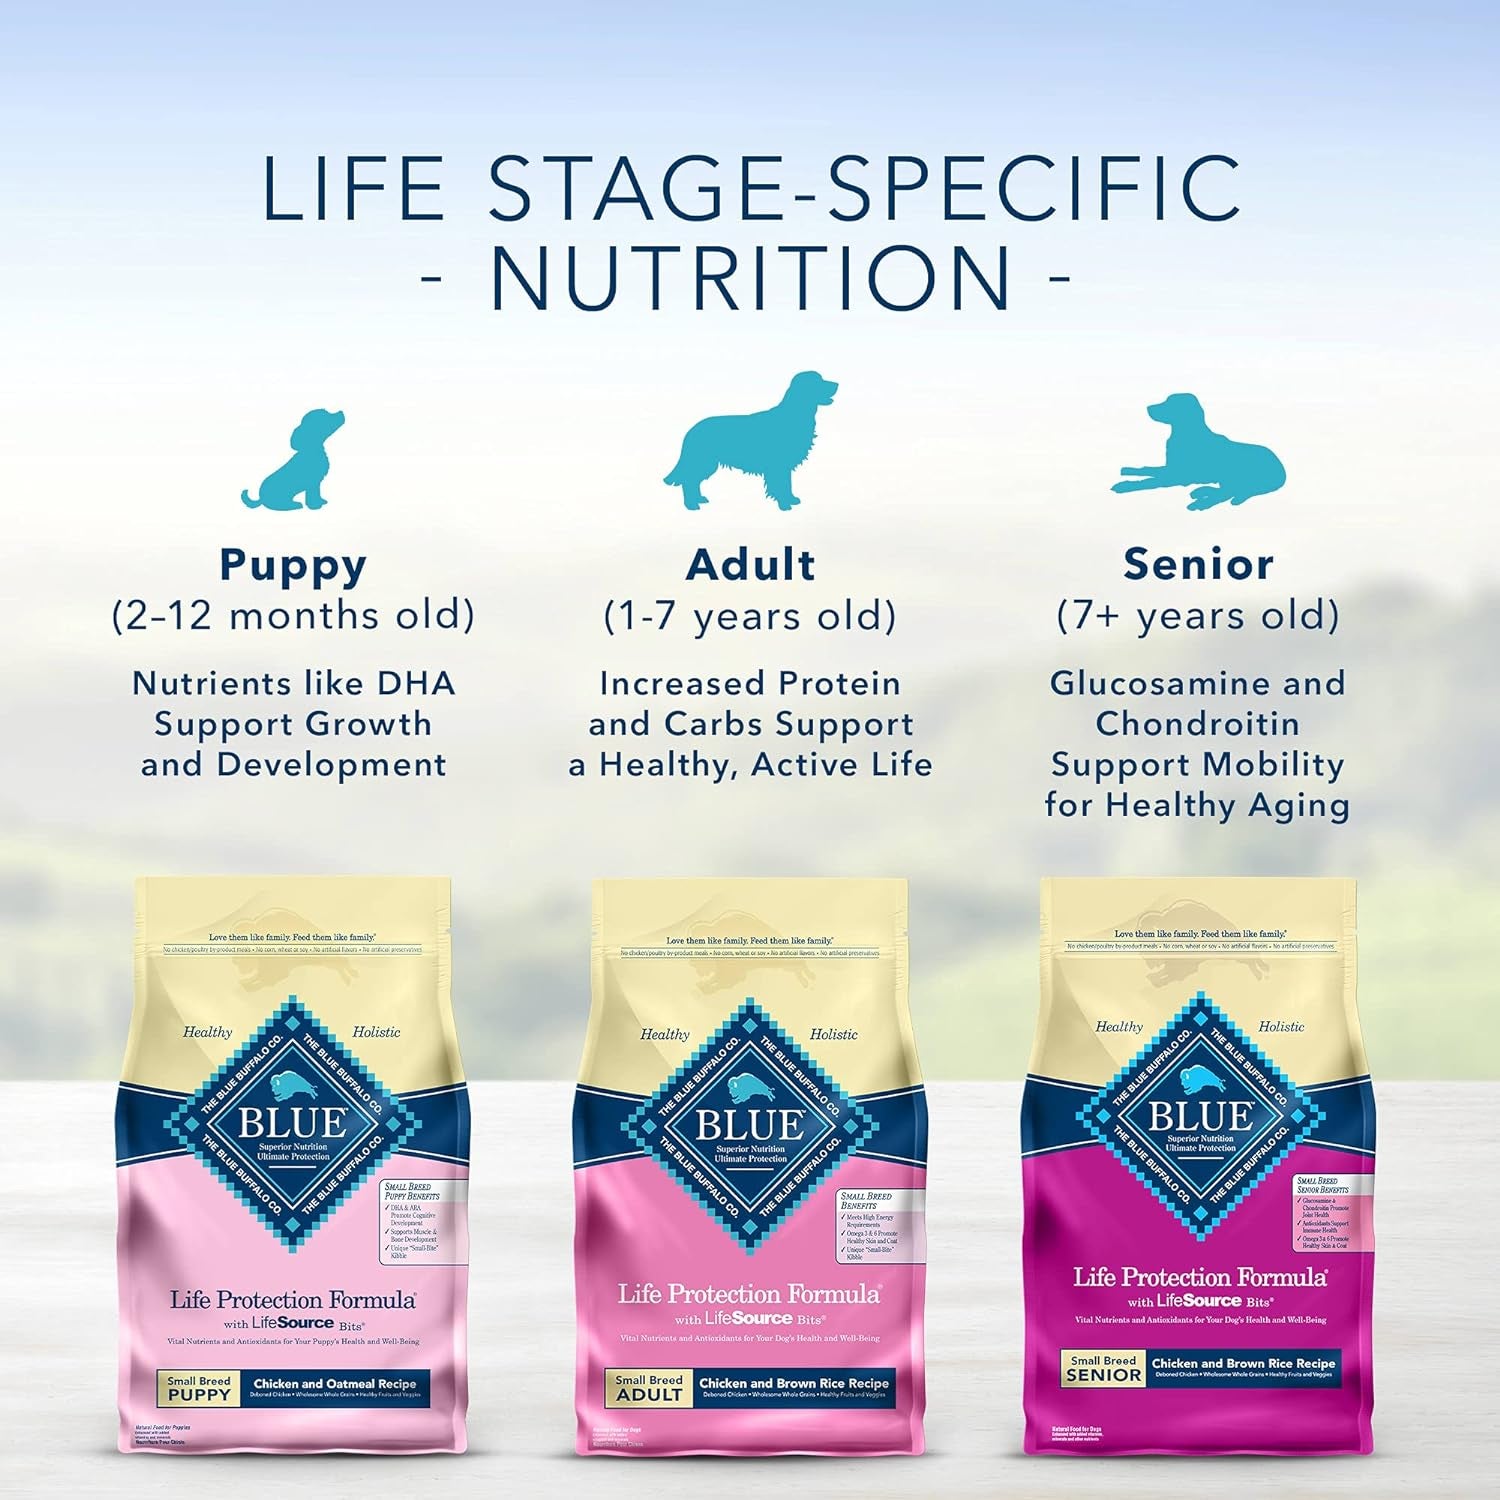 Life Protection Formula Natural Adult Small Breed Dry Dog Food, Chicken and Brown Rice 6-Lb